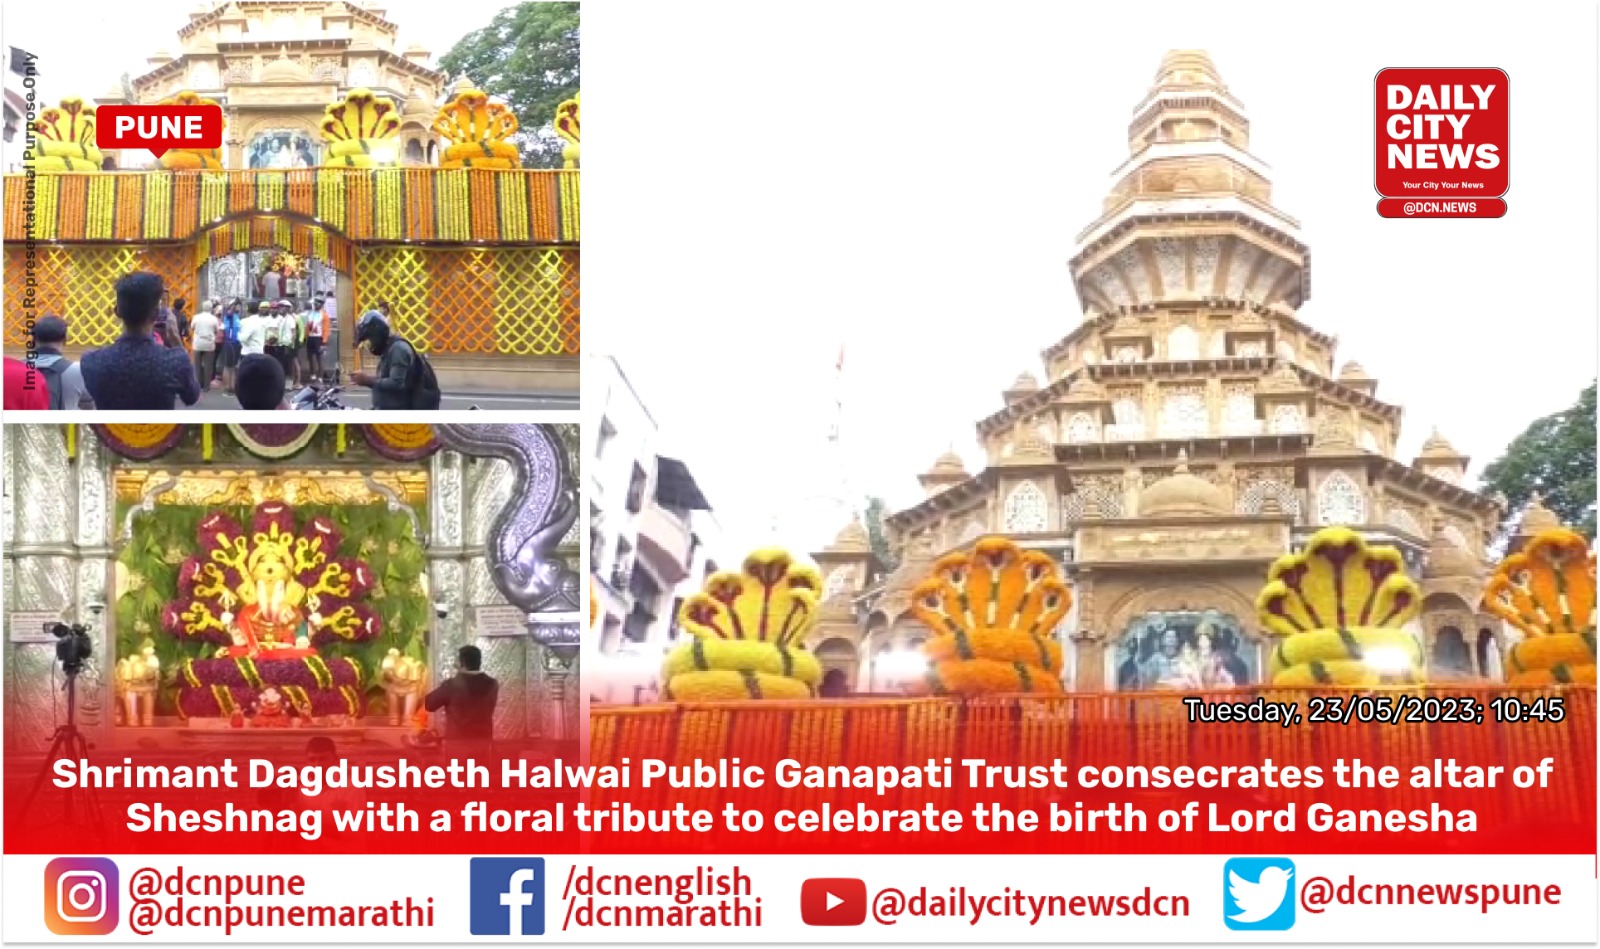 Shrimant Dagdusheth Halwai Public Ganapati Trust consecrates the altar of Sheshnag with a floral tribute to celebrate the birth of Lord Ganesha